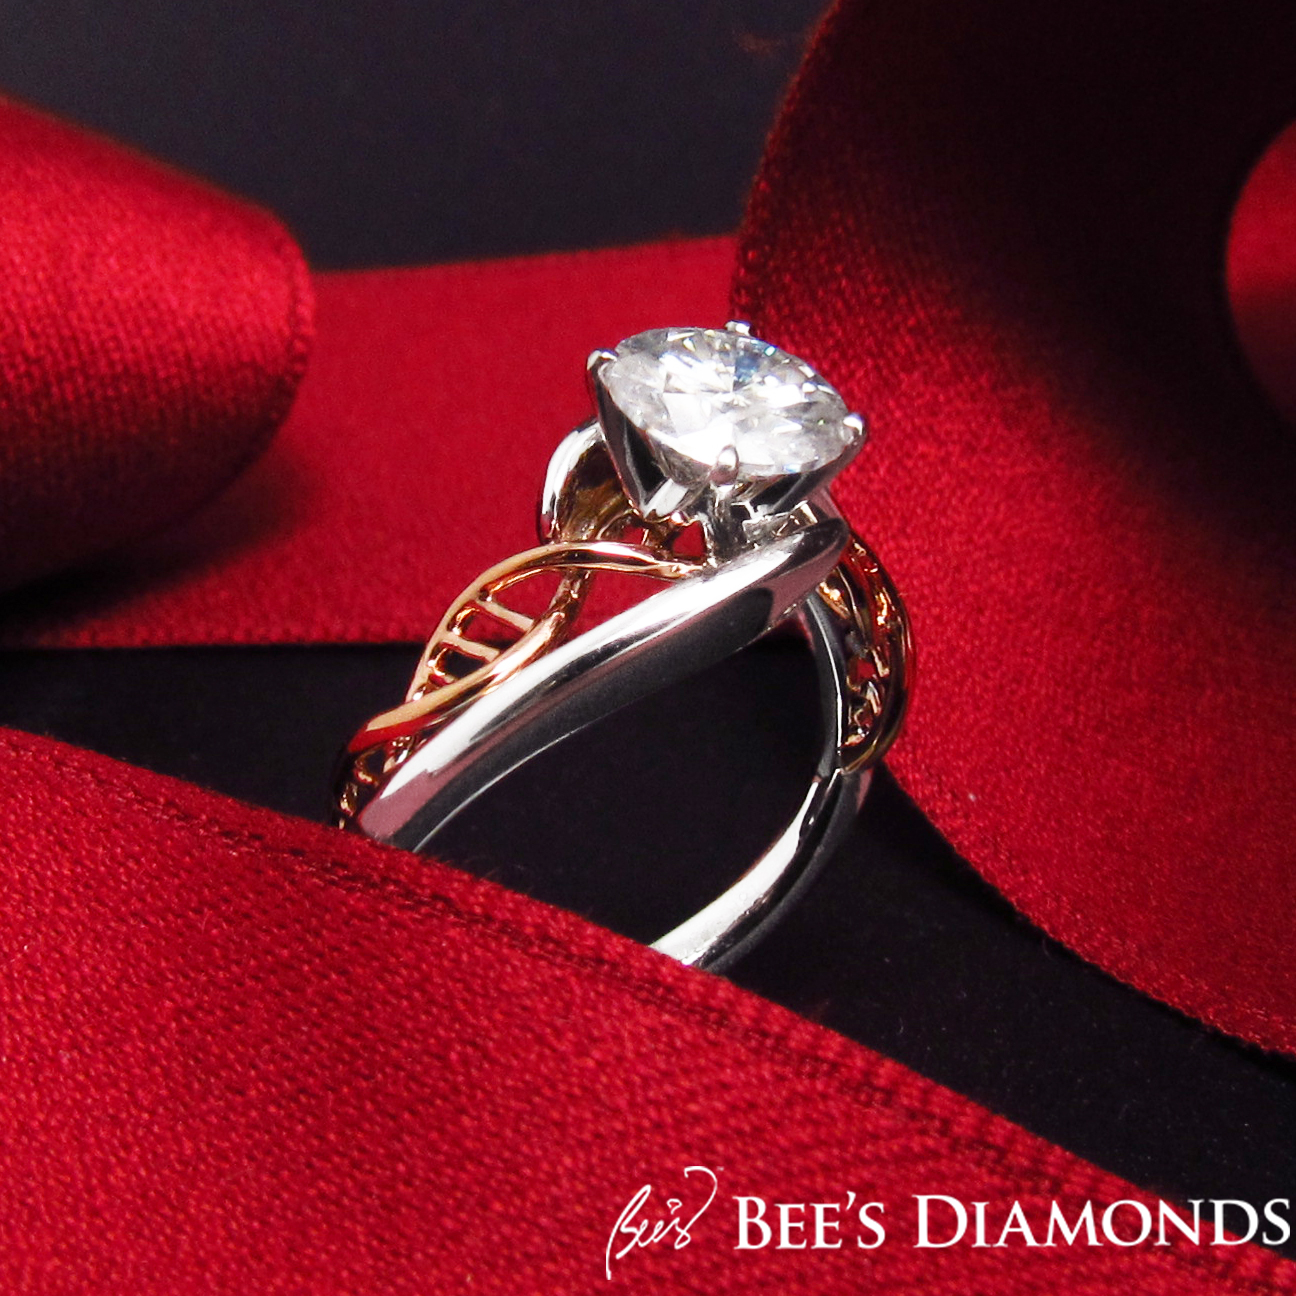 A solitaire diamond ring with DNA helix design | Bee's Diamonds